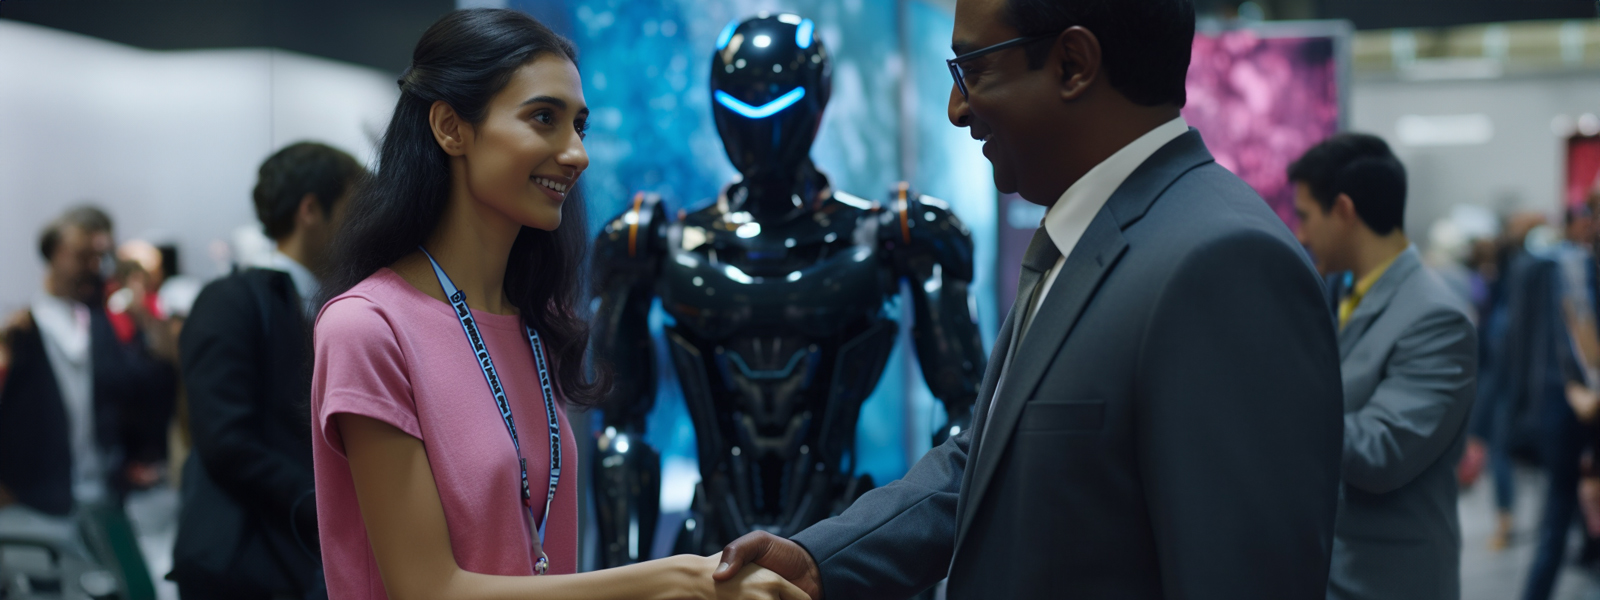 Woman shaking hands with a man in front of a robot at a tech exhibition with attendees in the background.